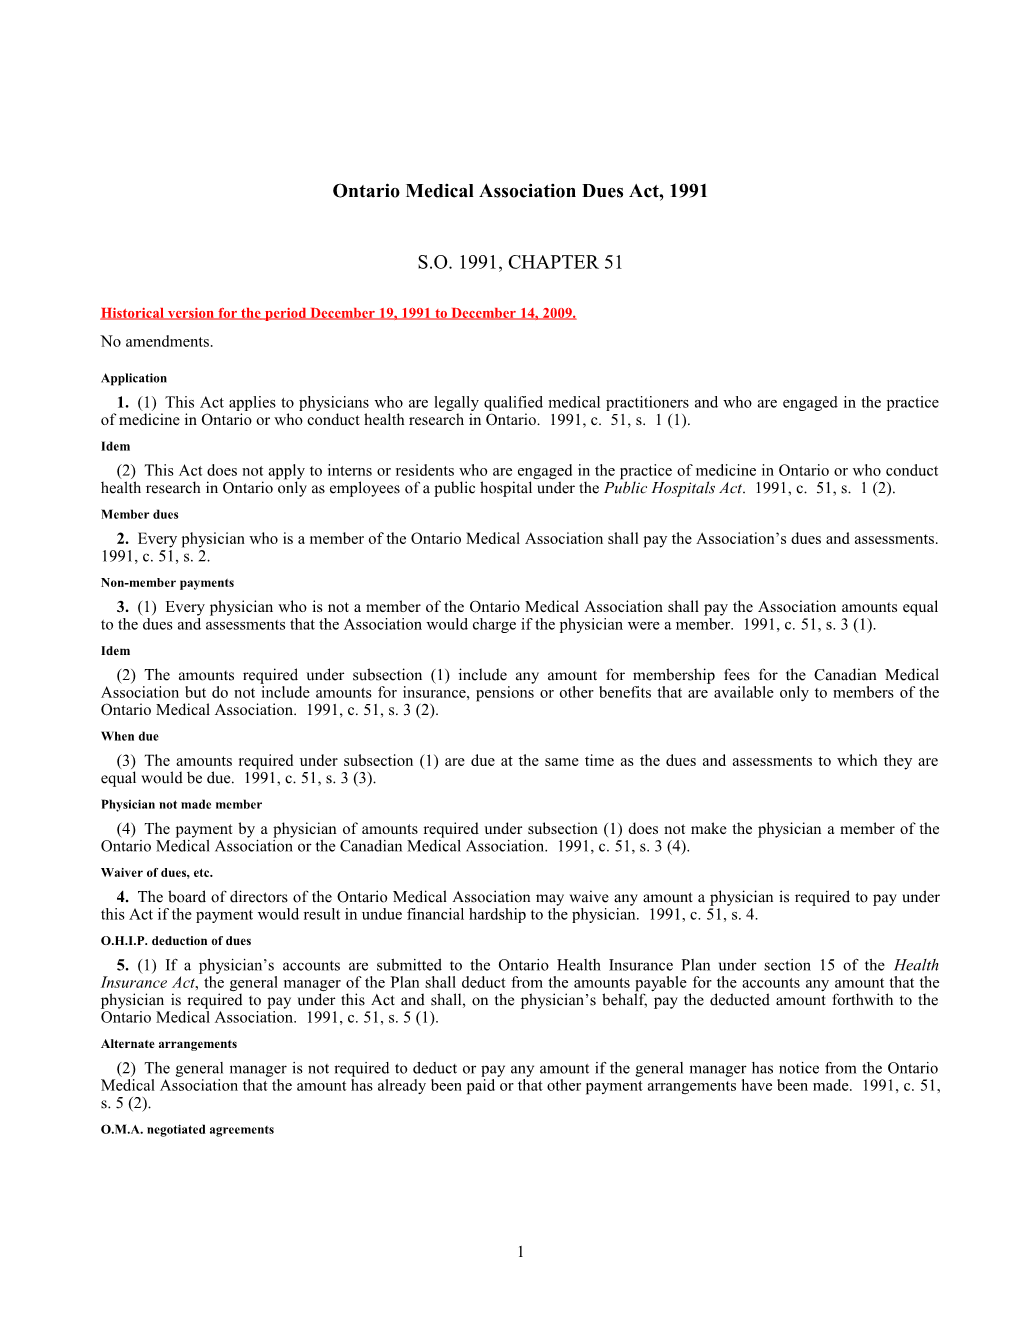 Ontario Medical Association Dues Act, 1991, S.O. 1991, C. 51